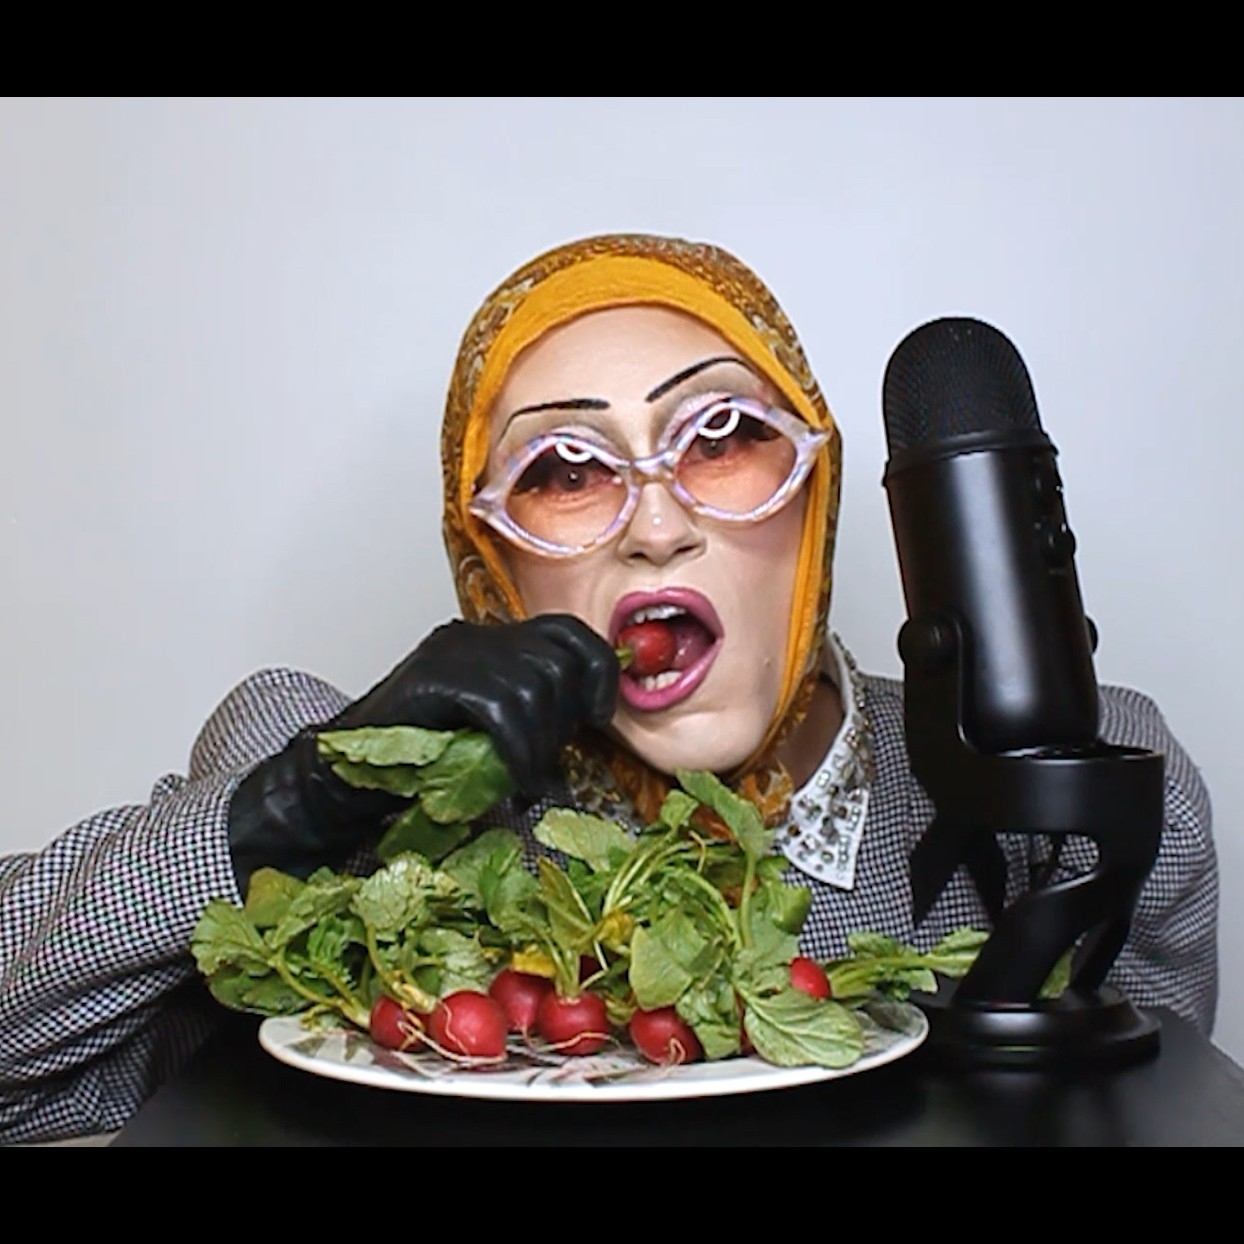 ASMR artist eating in front of microphone